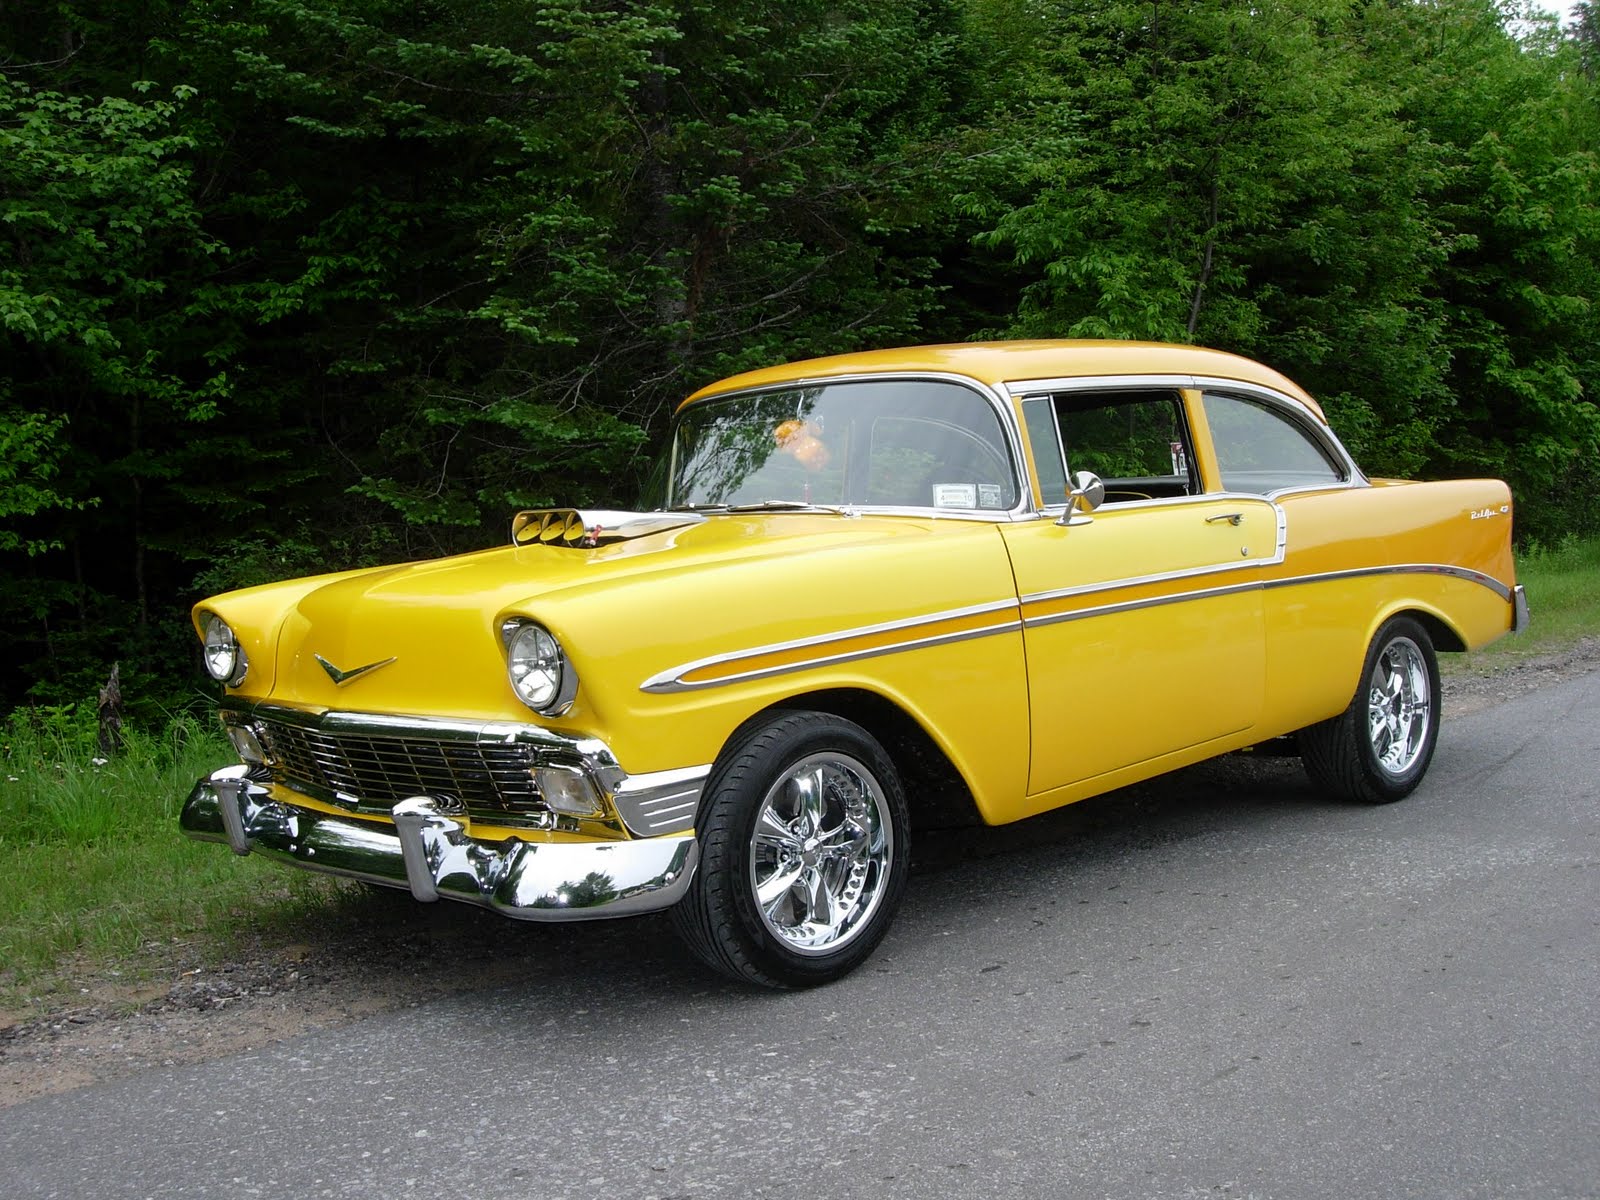 13th Annual Antique Car Show in Old Forge - - The Adirondack Almanack